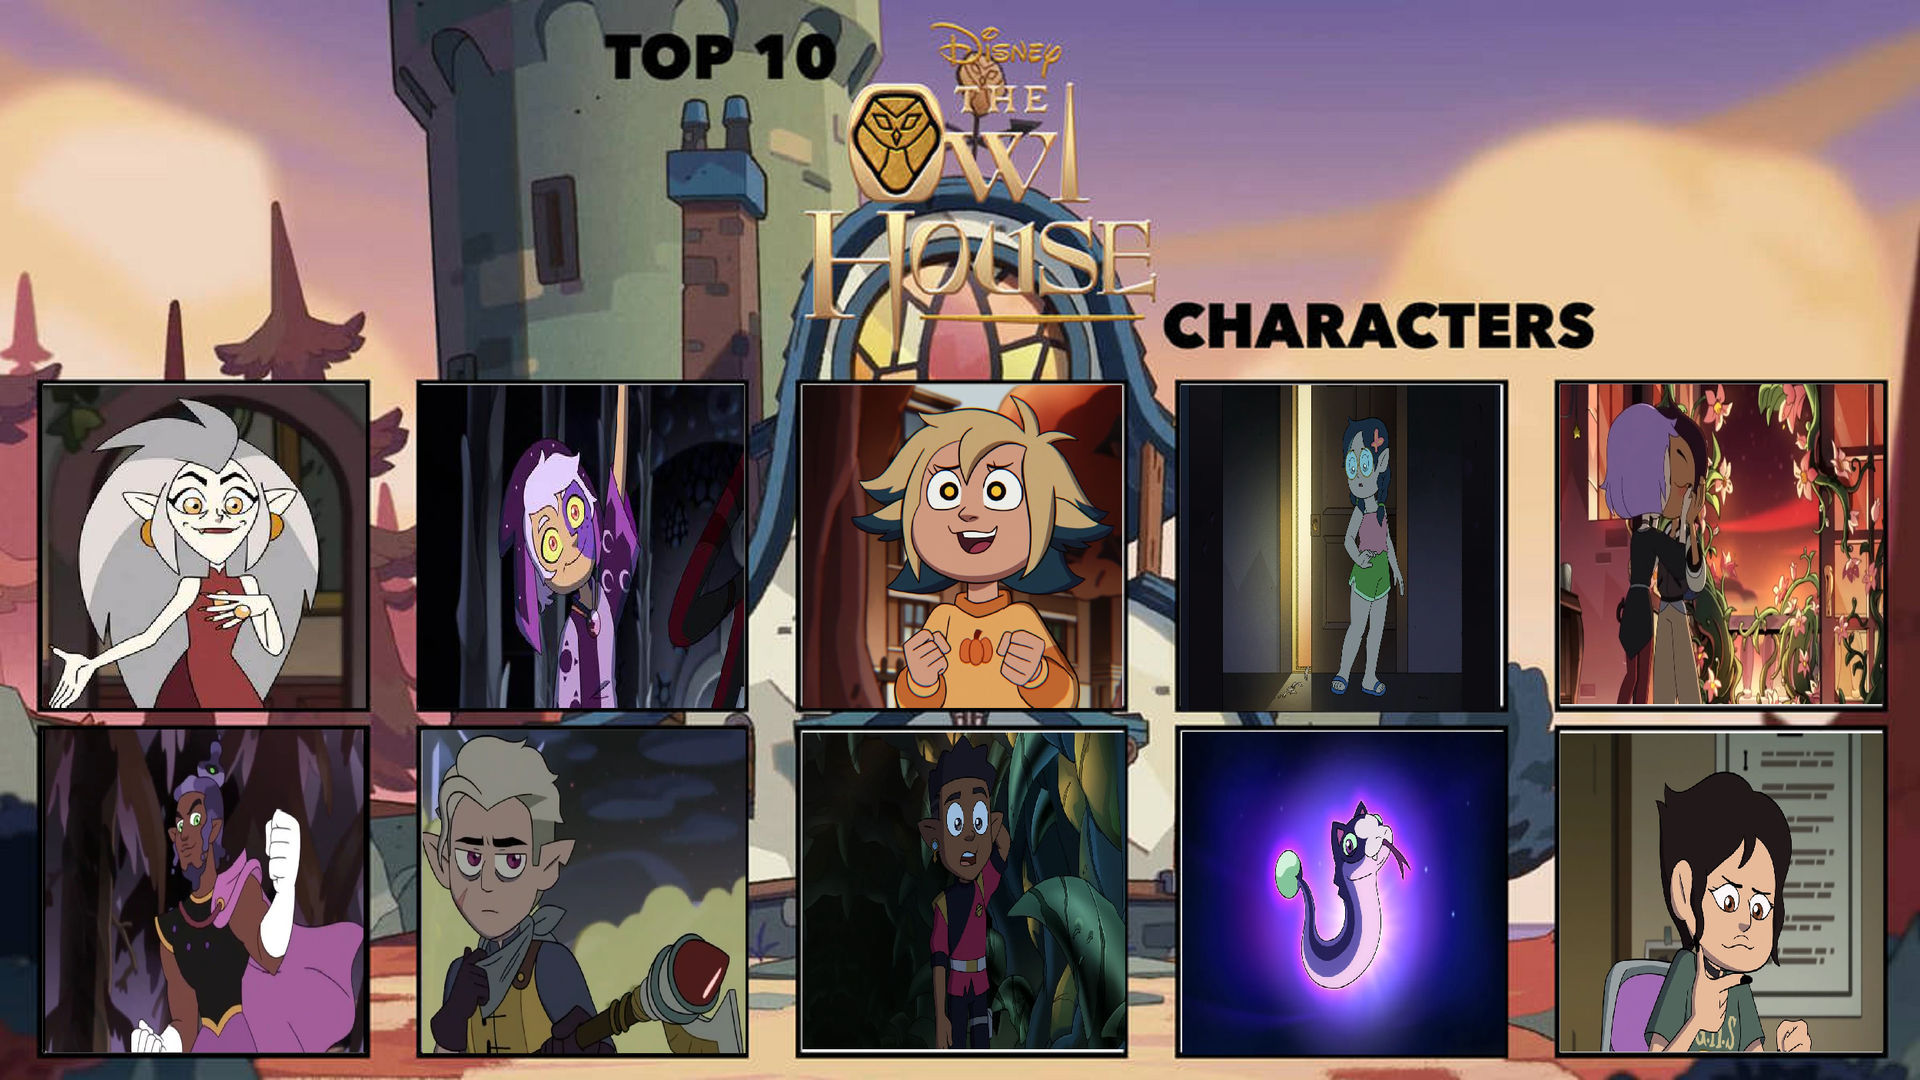 The Owl House: 10 Best Supporting Characters